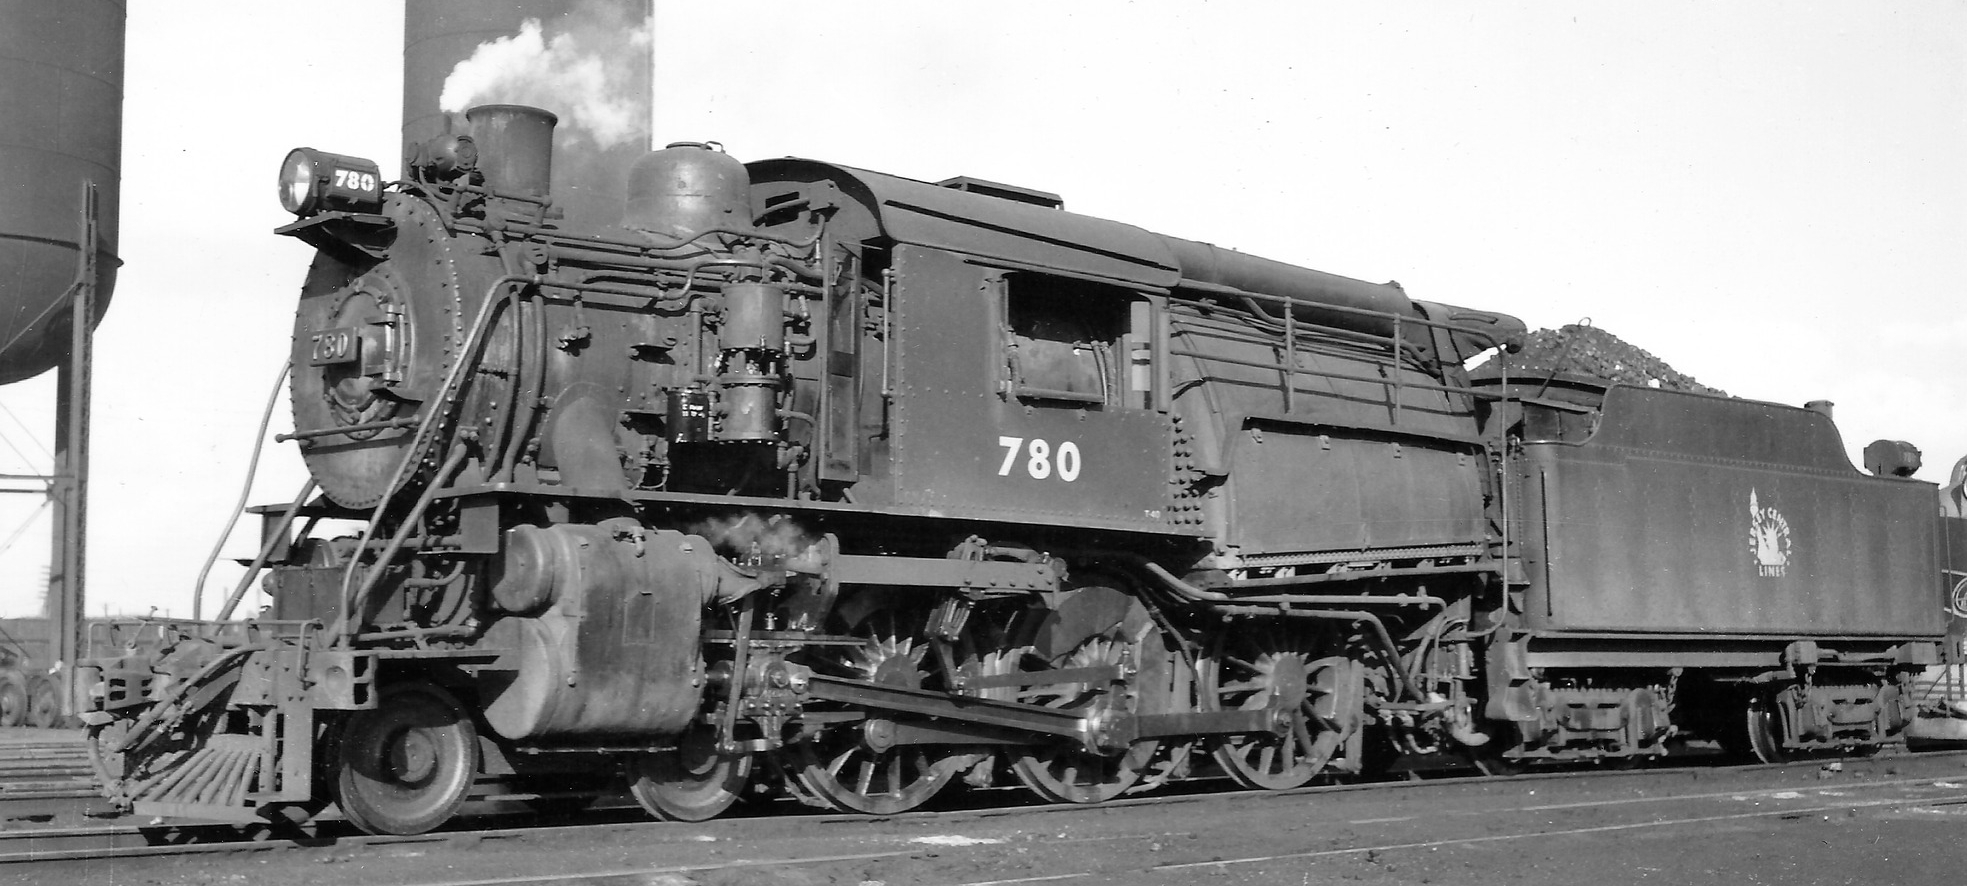 No. 780 in November 1948 at Jersey City, New Jersey